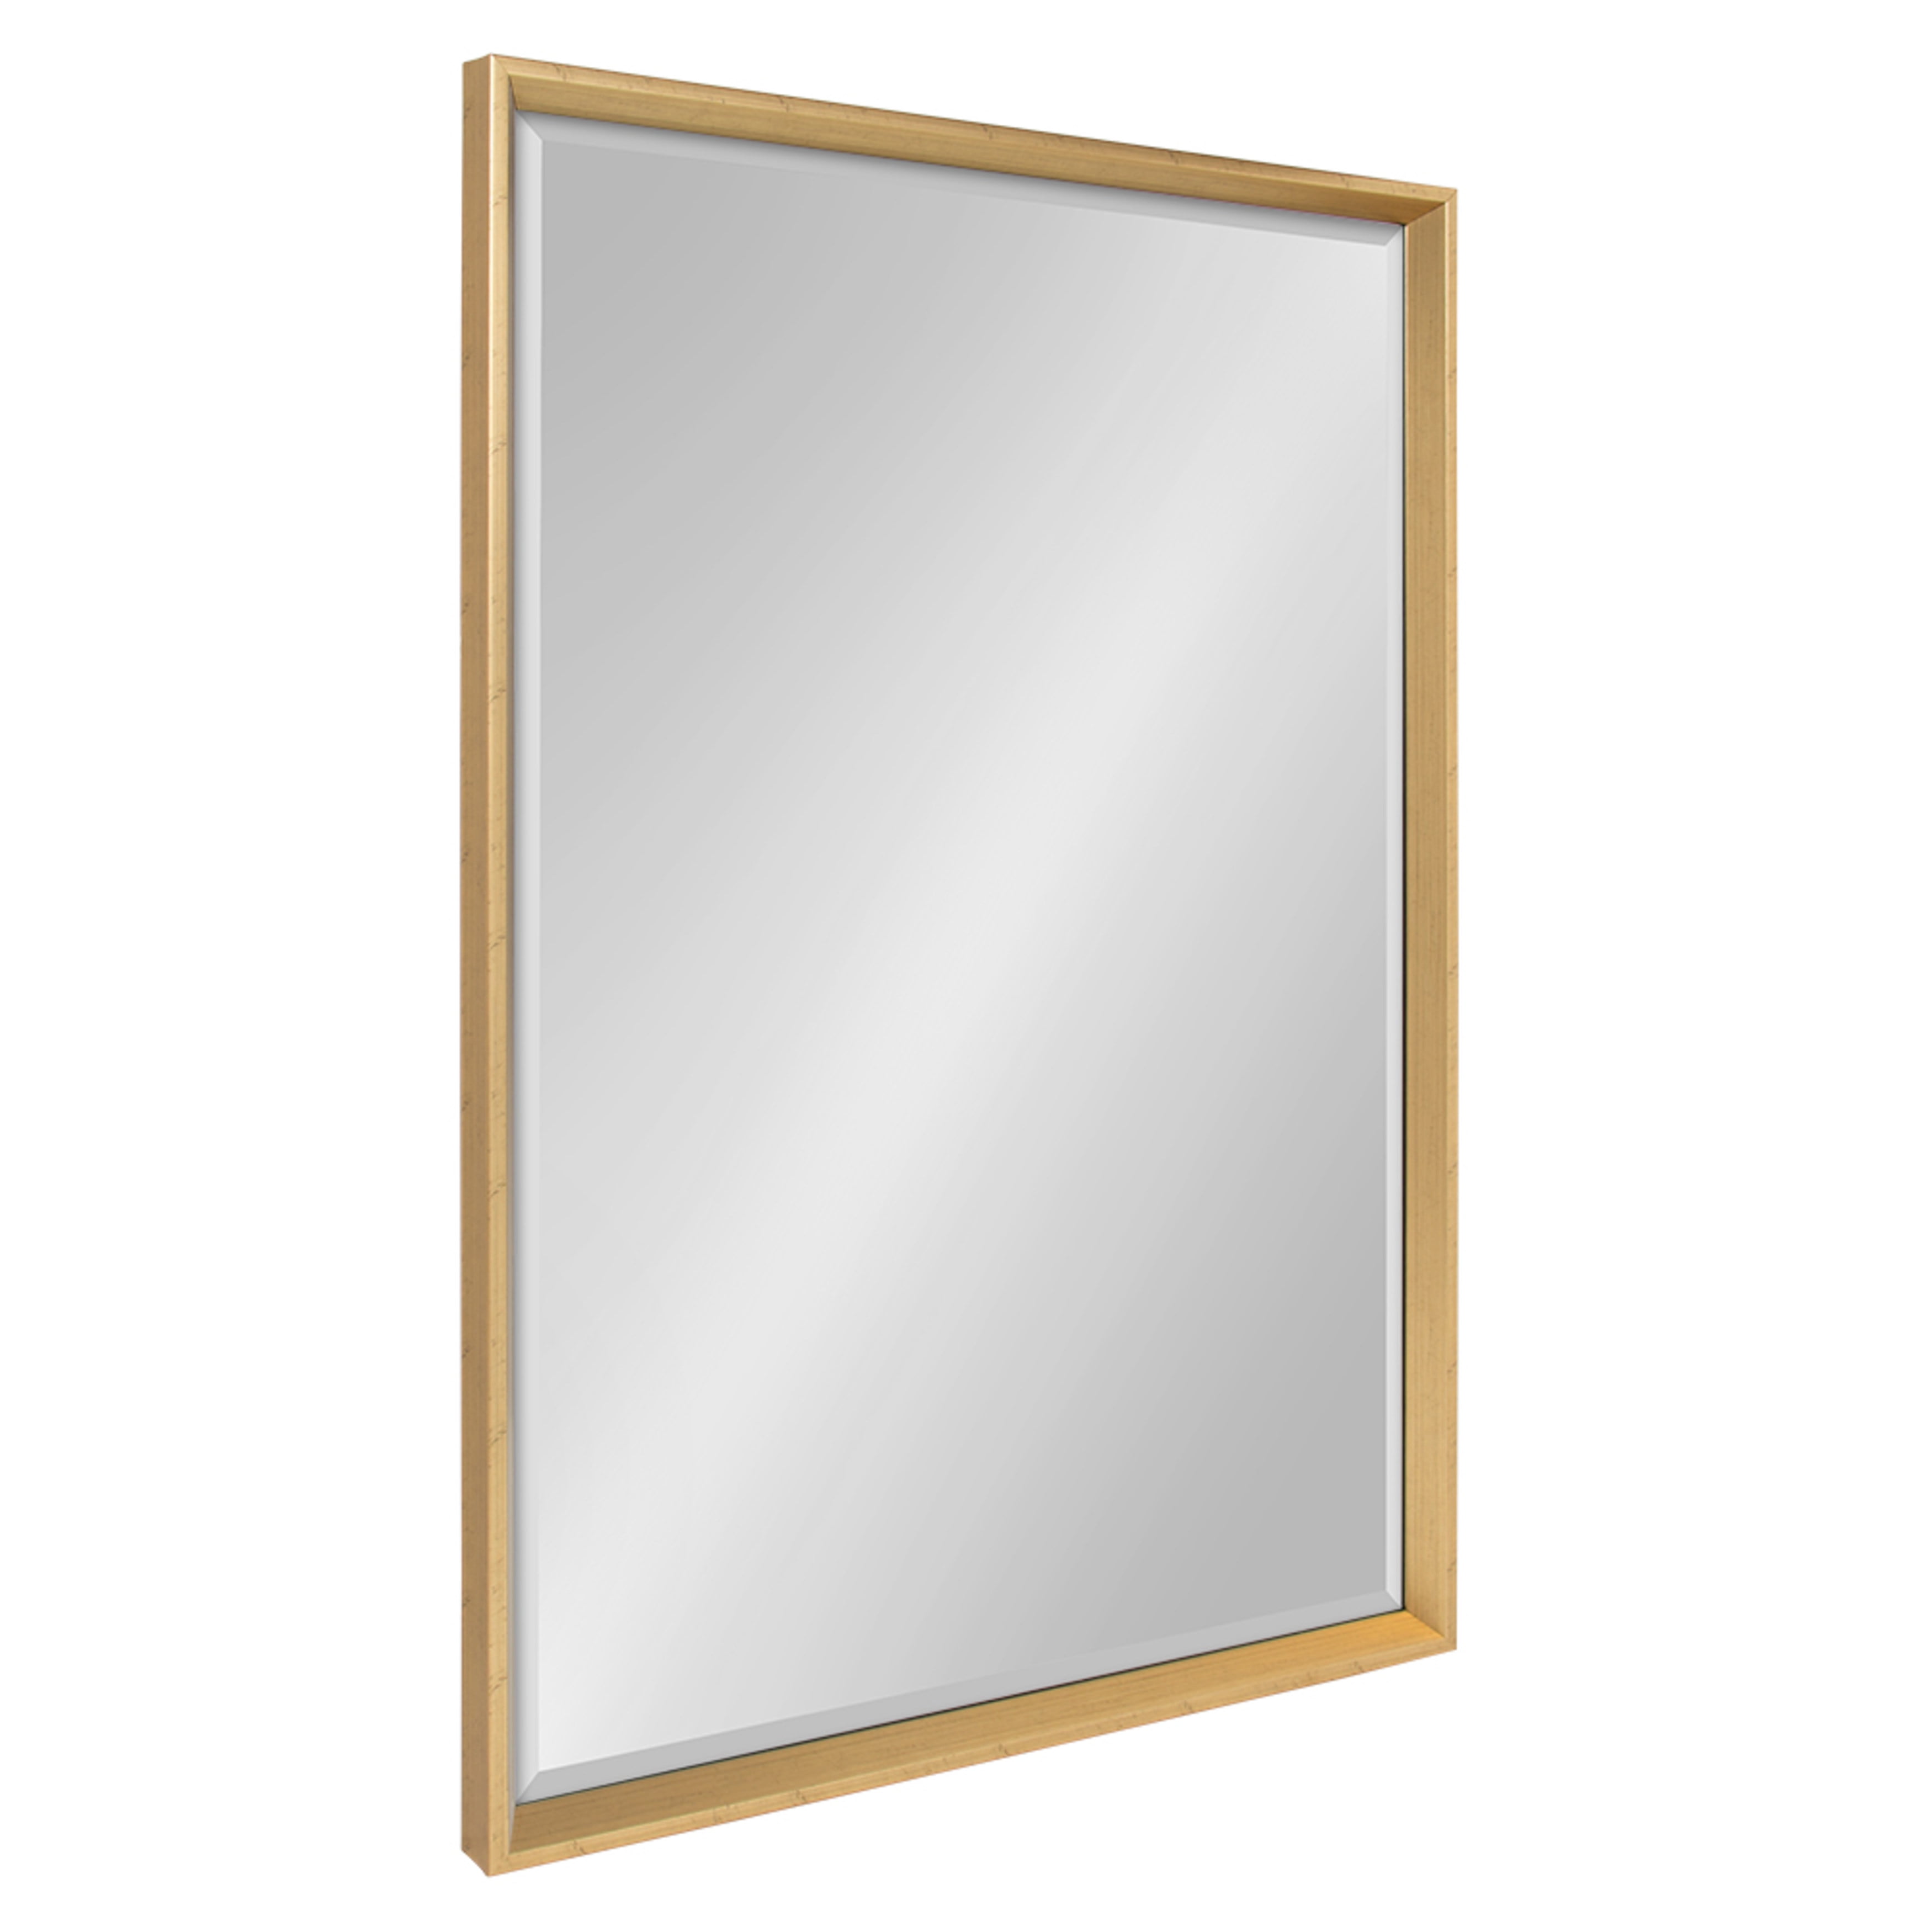 Kate and Laurel Calter Modern Decorative Framed Beveled Wall Mirror,  25.5x37.5 Gold